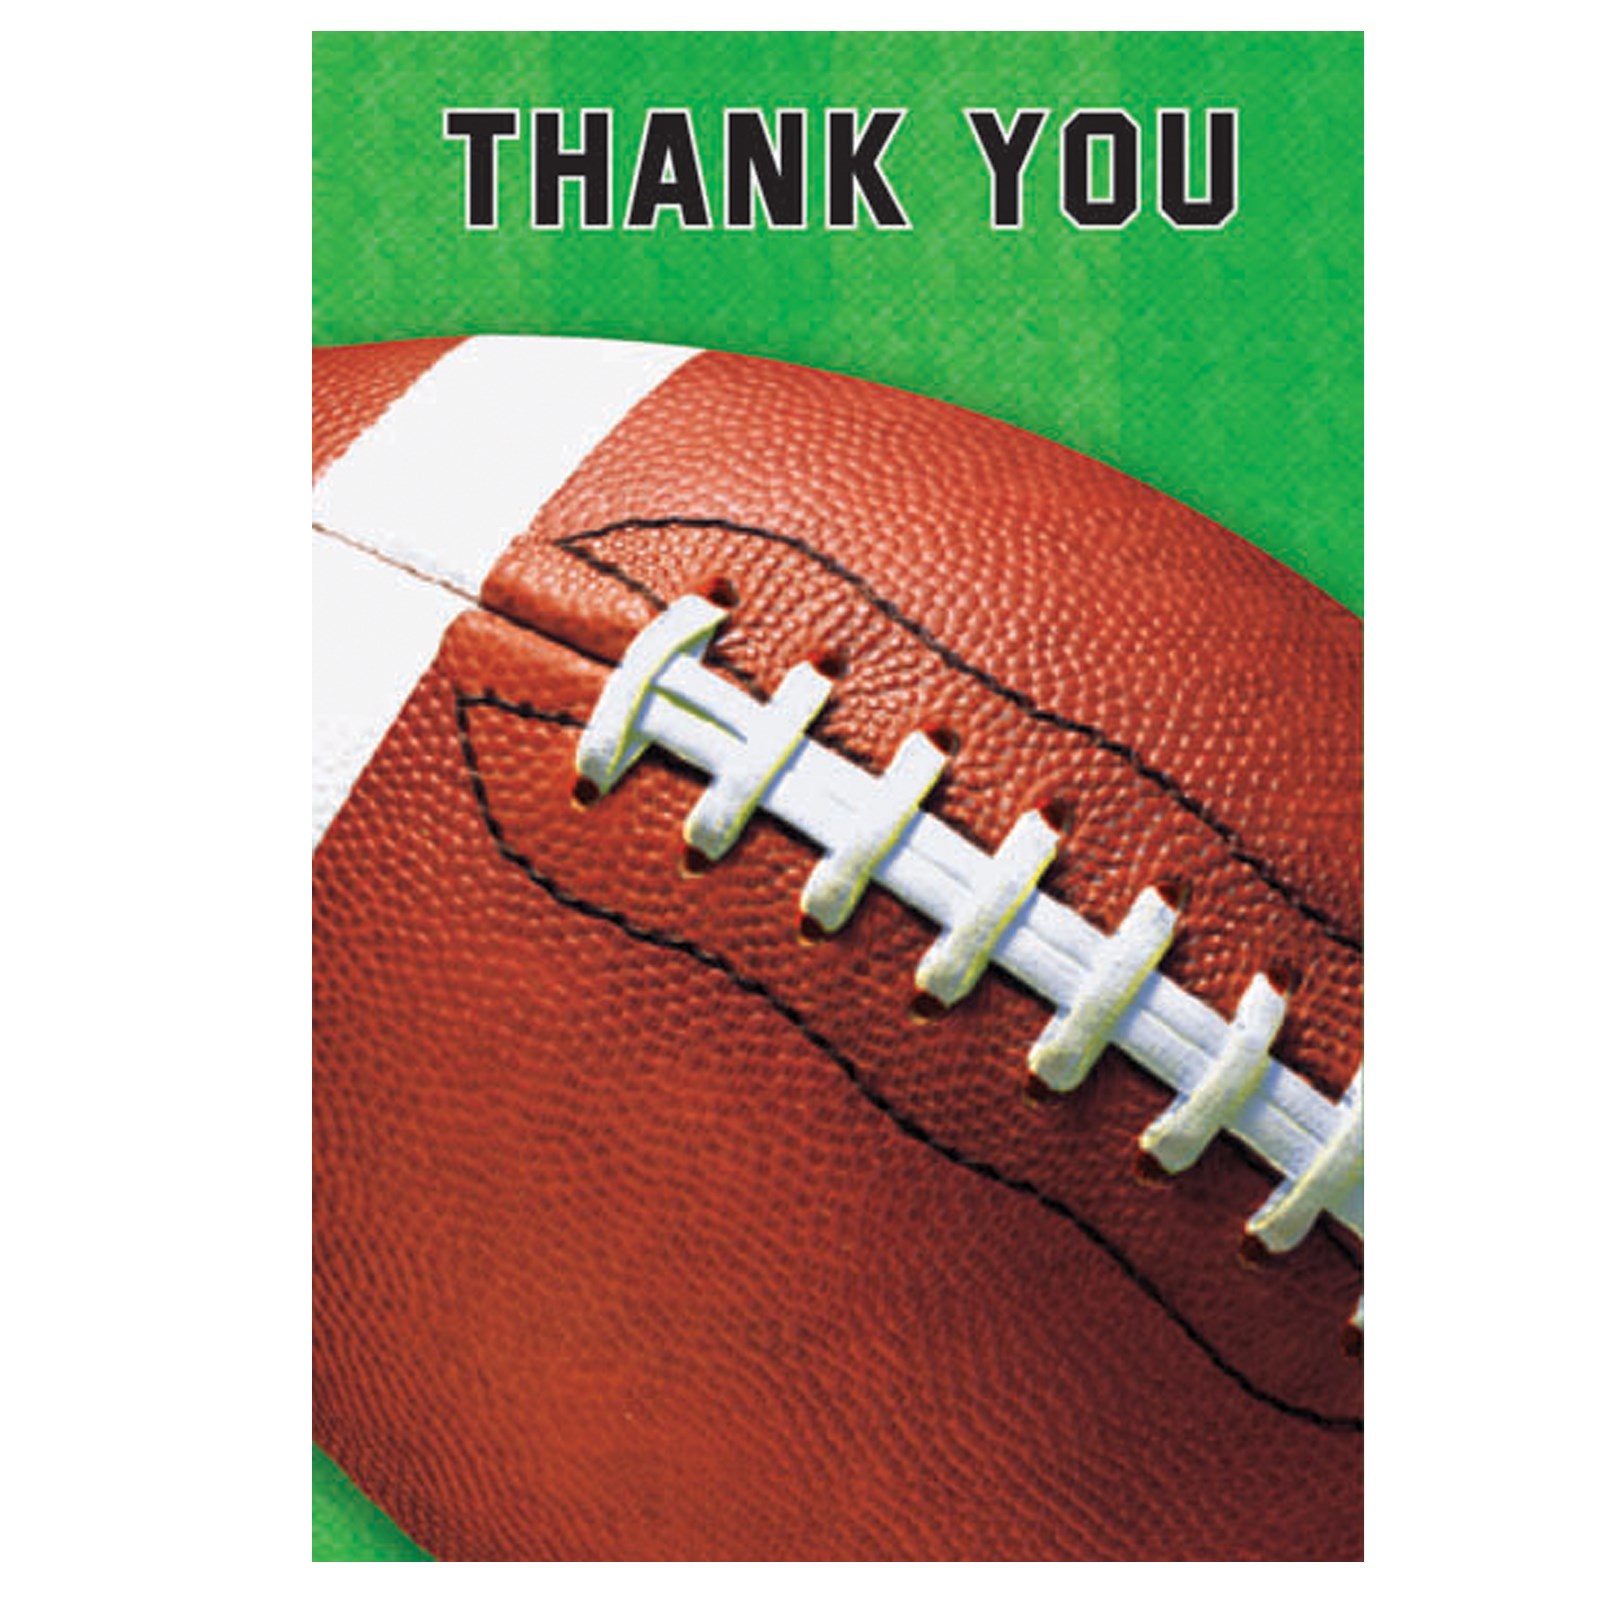 Football Fan – Thank You Cards 8 count